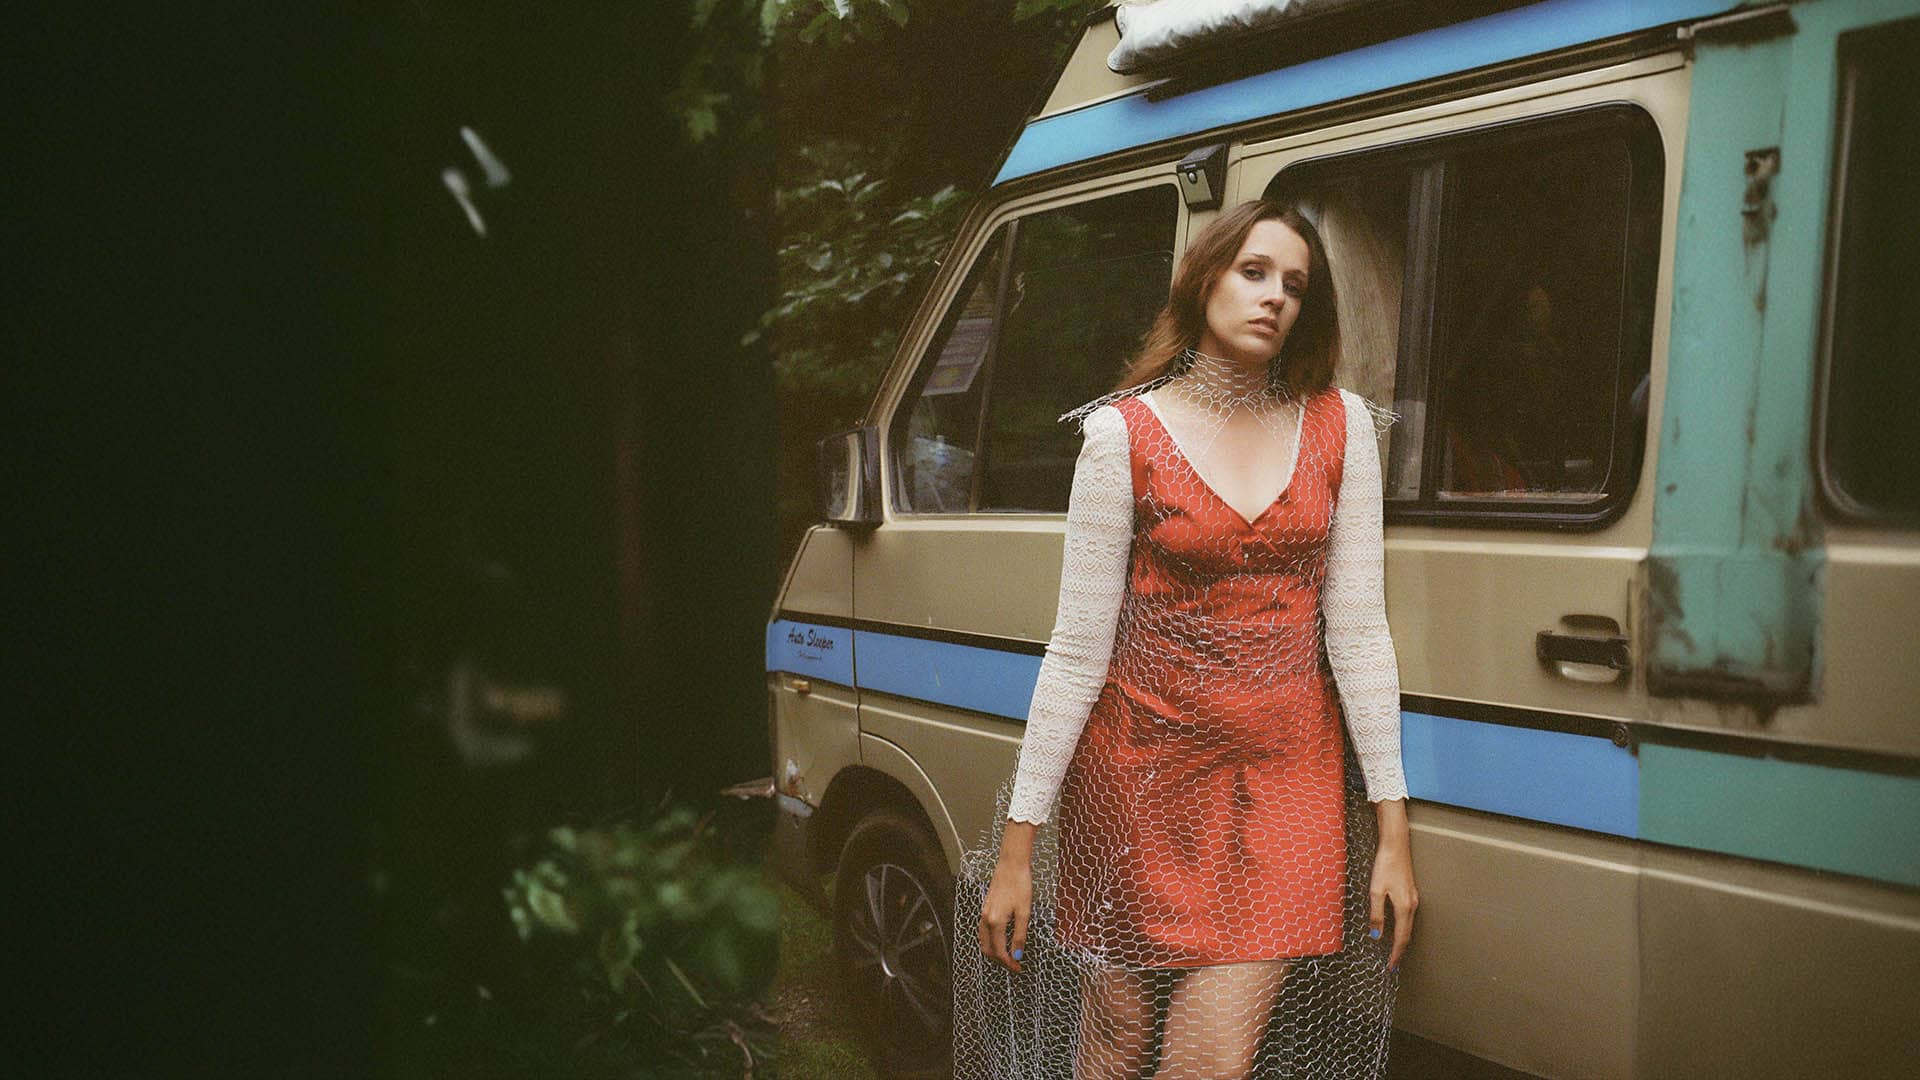 Singer-songwriter Sophie Kilburn stands beside a vintage van, clad in a red dress layered with a white lace top and a netted overlay.